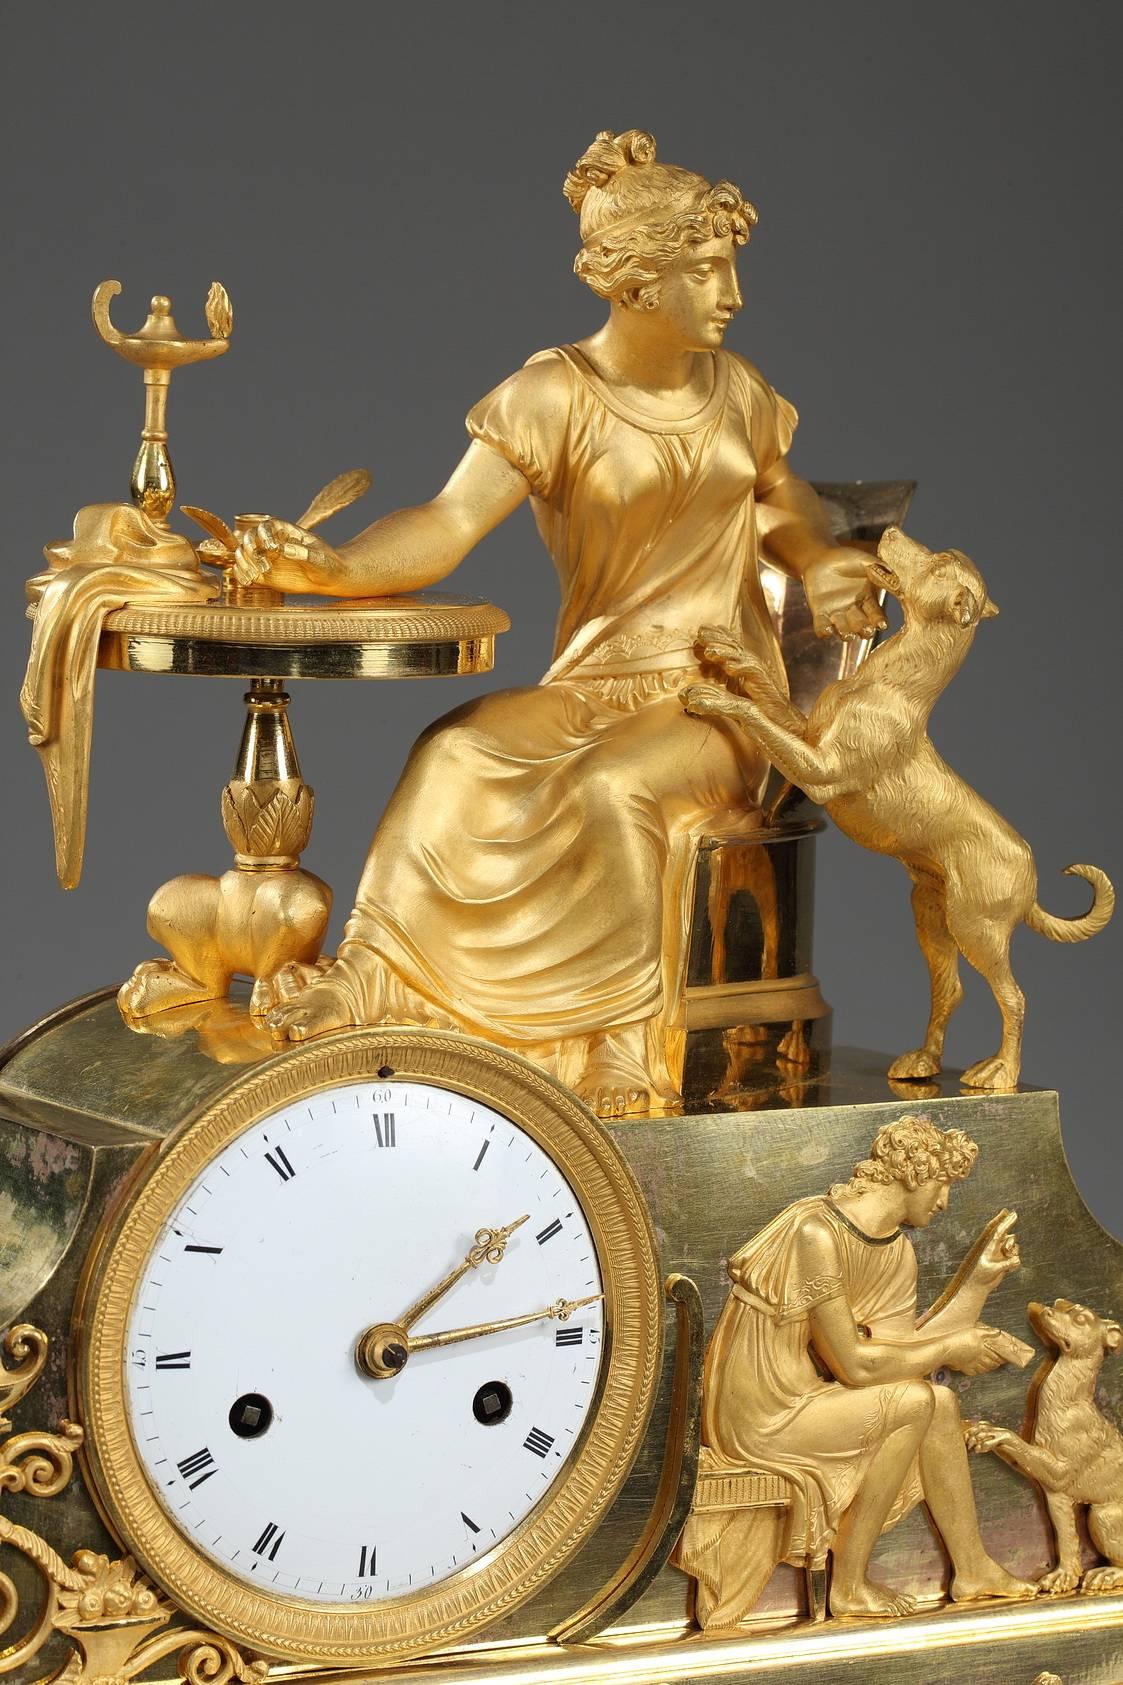 Early 19th century Empire gilt bronze mantel clock with allegorical scene depicting a young woman sitting at her work table playing with her dog, a symbol of loyalty. The pair is set above a raised case containing the dial. On one side of the dial